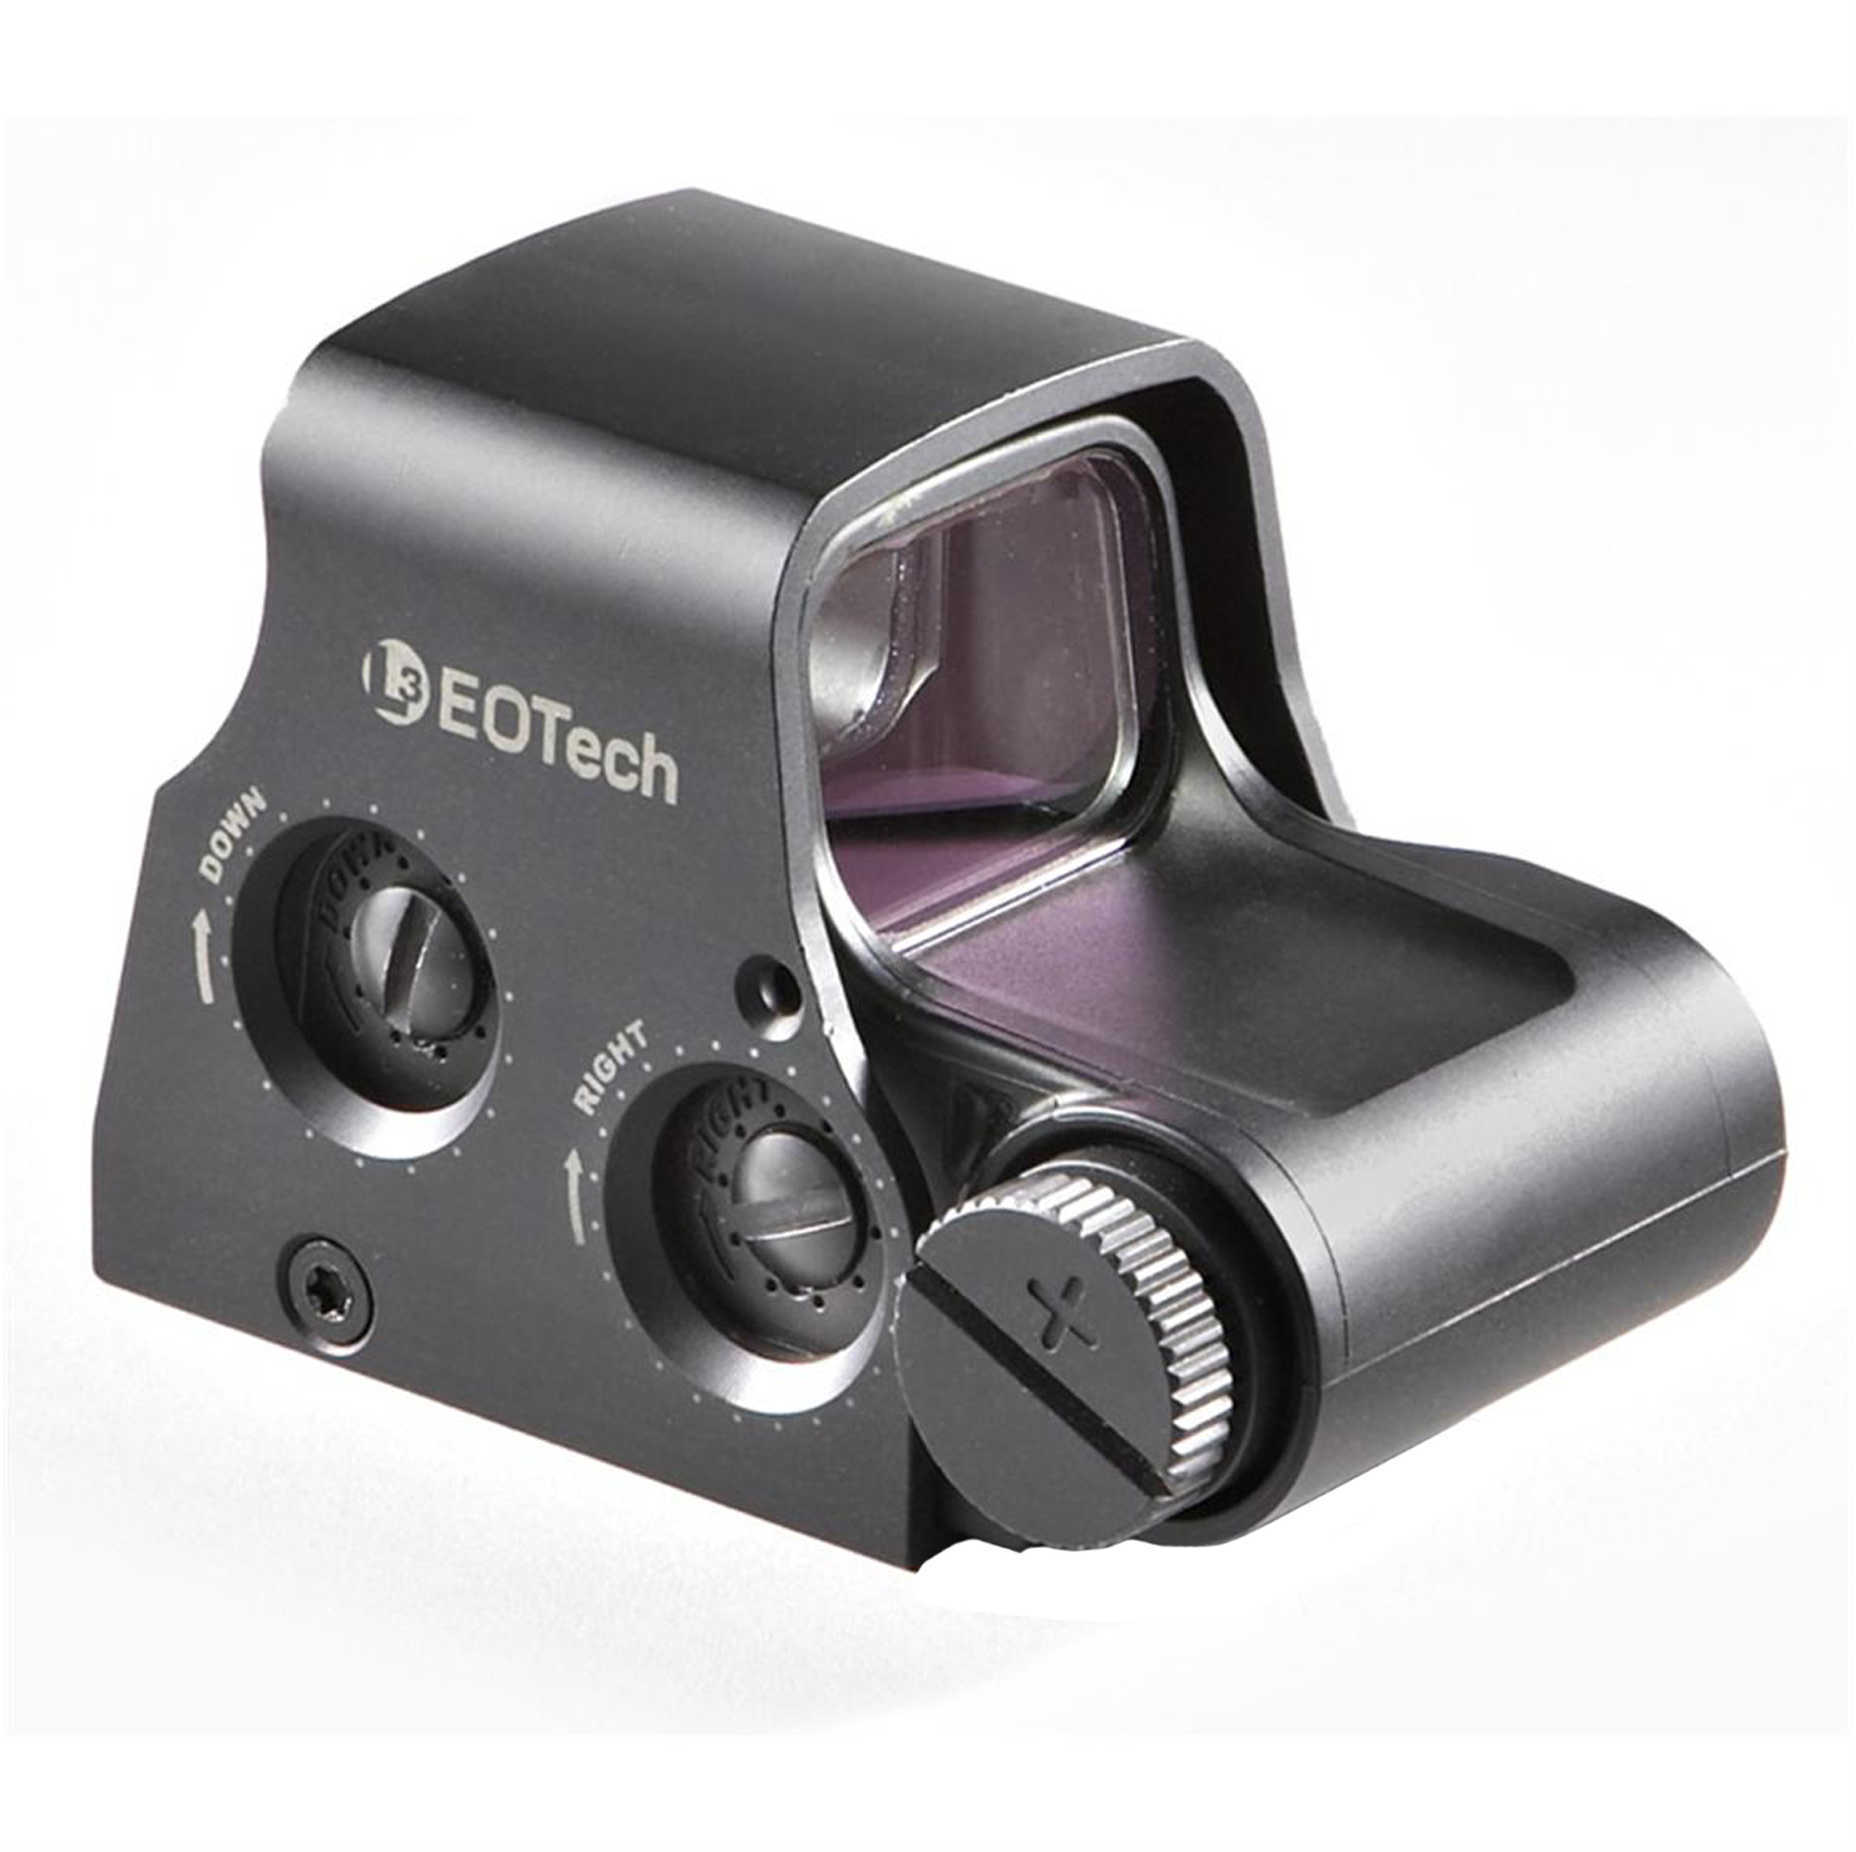 EOTech Model XPS2 65 MOA Ring With 1 MOA Dot - Single Transverse Cr123 Battery To Reduce Sight Length requiRing at Most